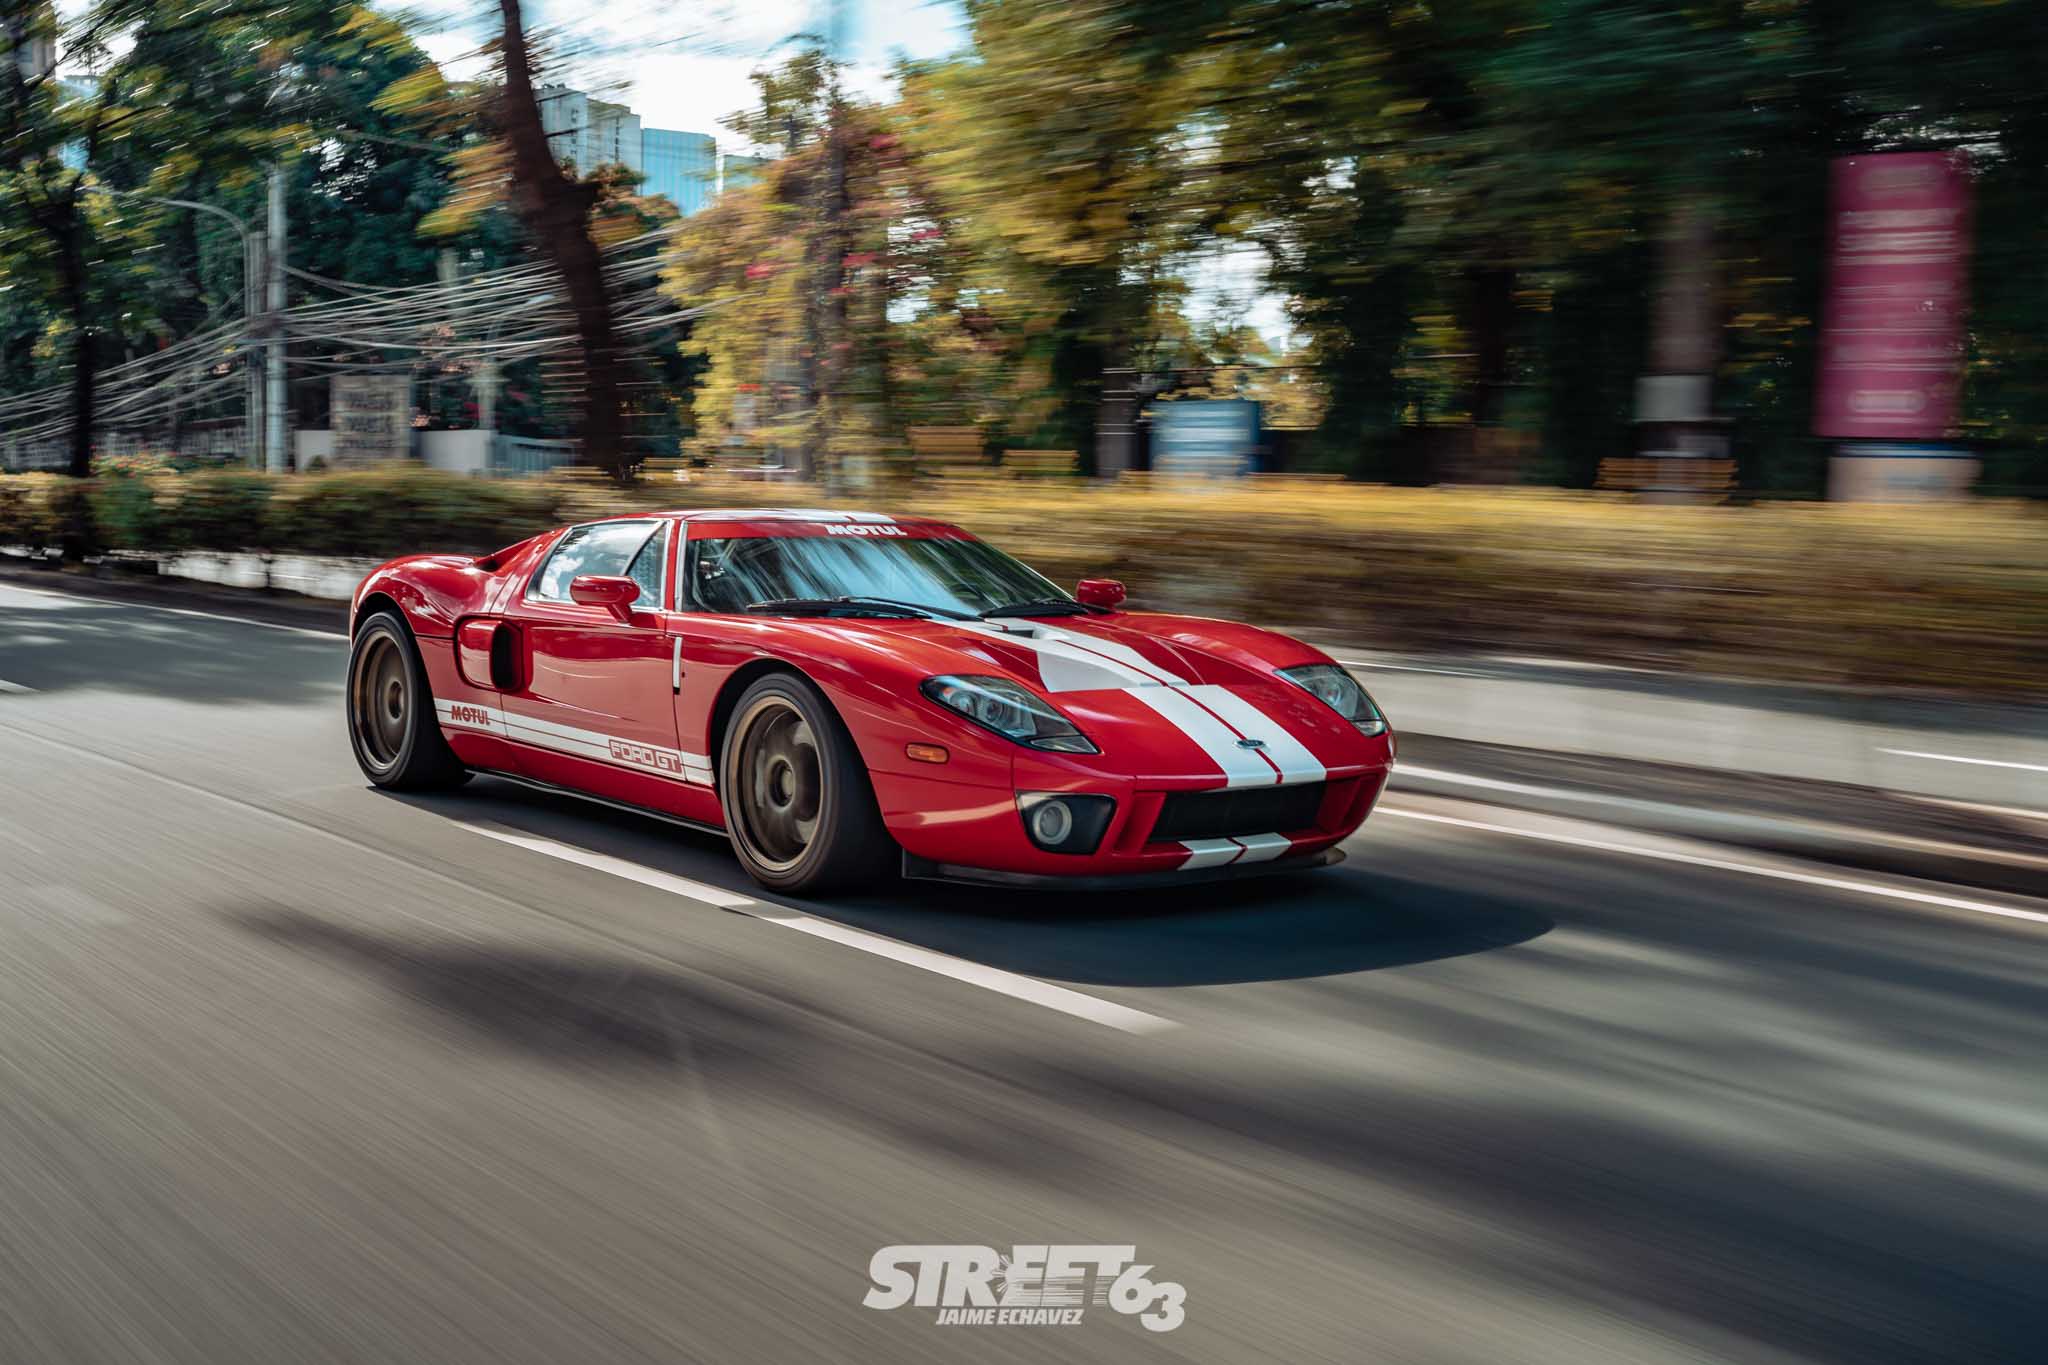 **Top Speed Legacy:** The Autoplus Ford GT